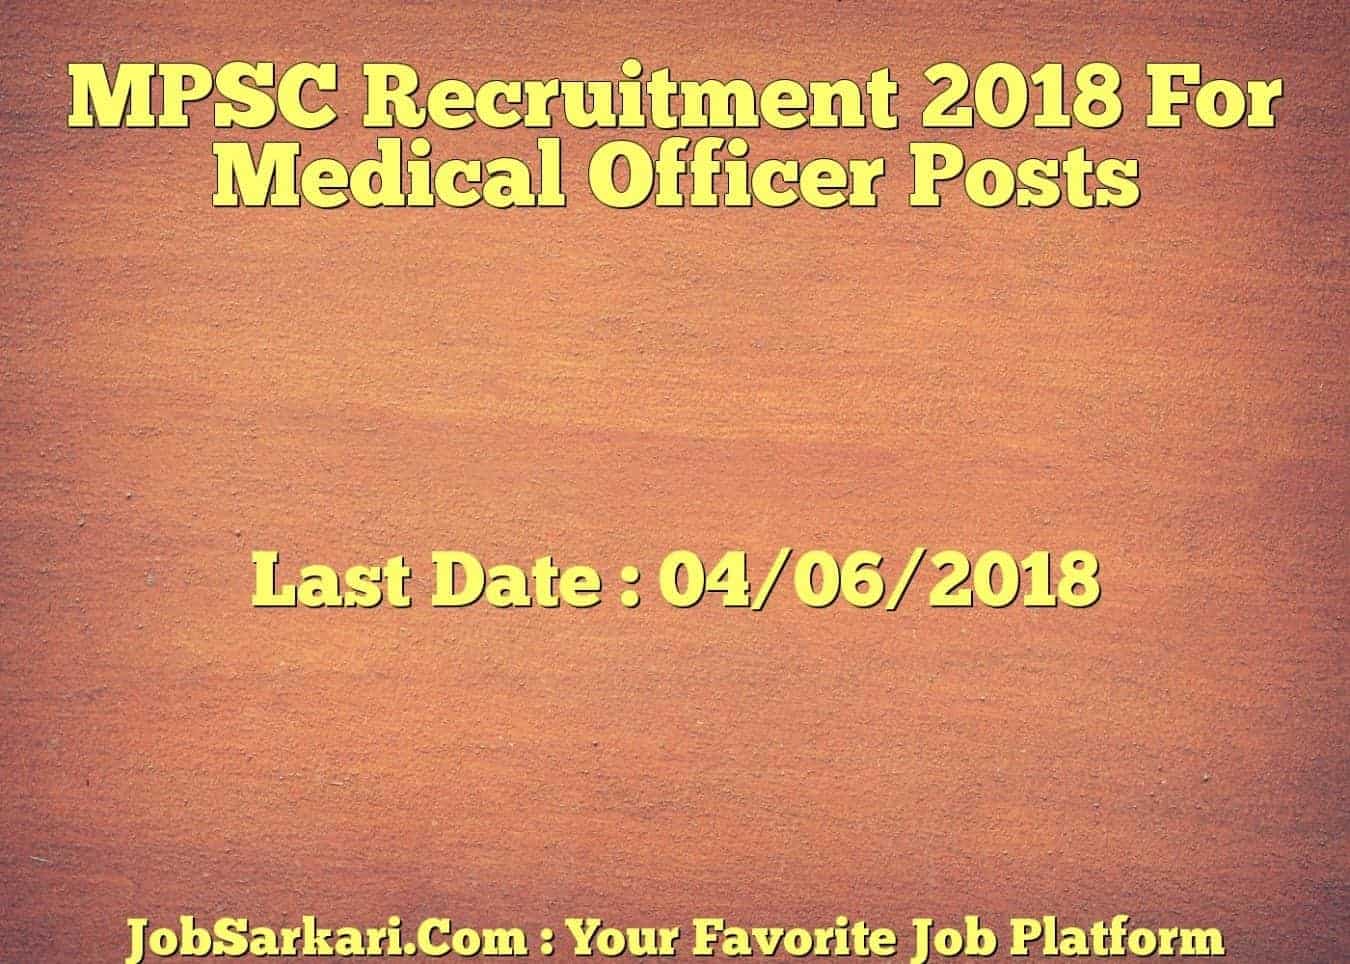 MPSC Recruitment 2018 For Medical Officer Posts